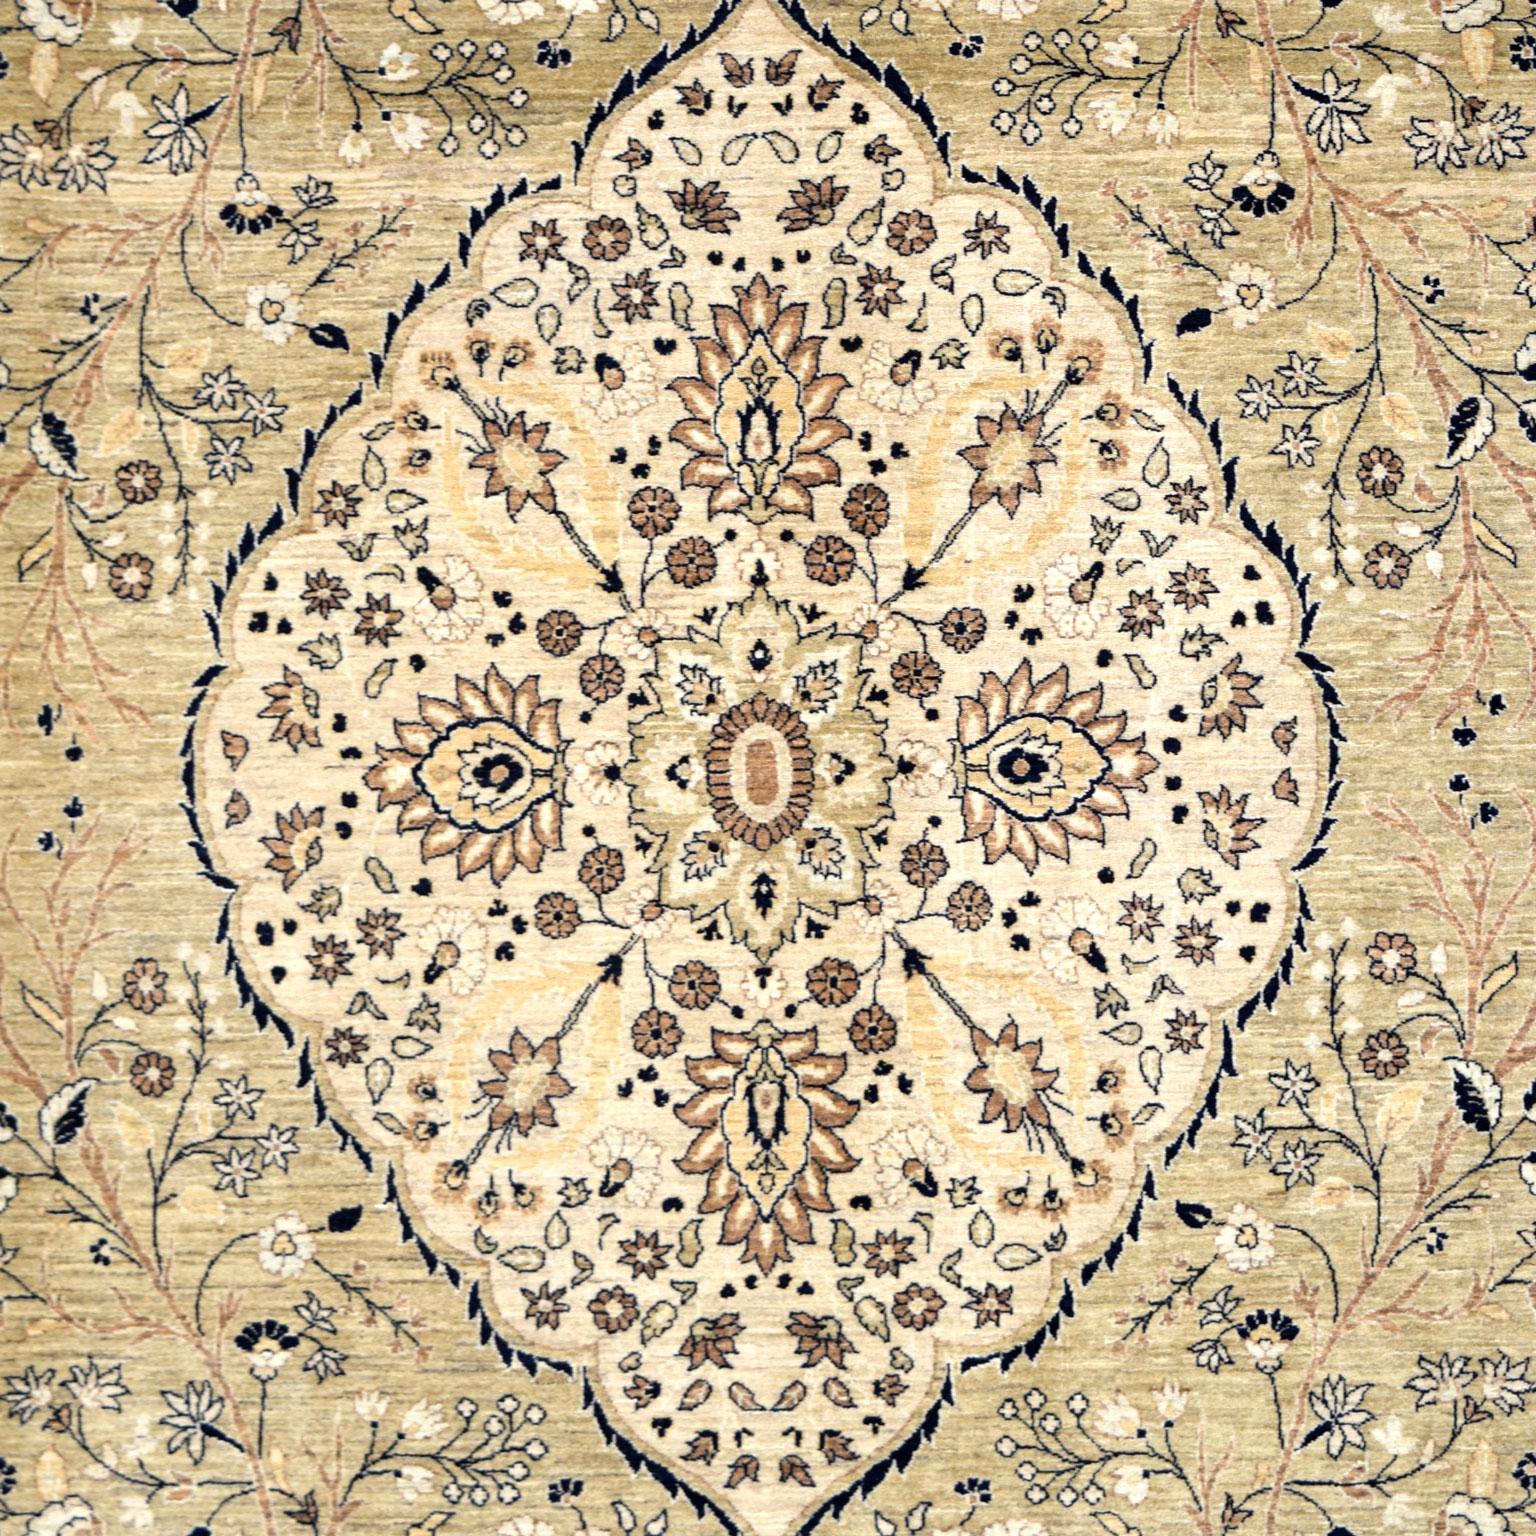 With bold indigo details outlining blooming floral designs, this ivory Kashan Mohtashan carpet measures 9’ x 12’6” and belongs to the Orley Shabahang Transitional collection. Inspired by the lavish Shah Abbas Persian garden, its design depicts a